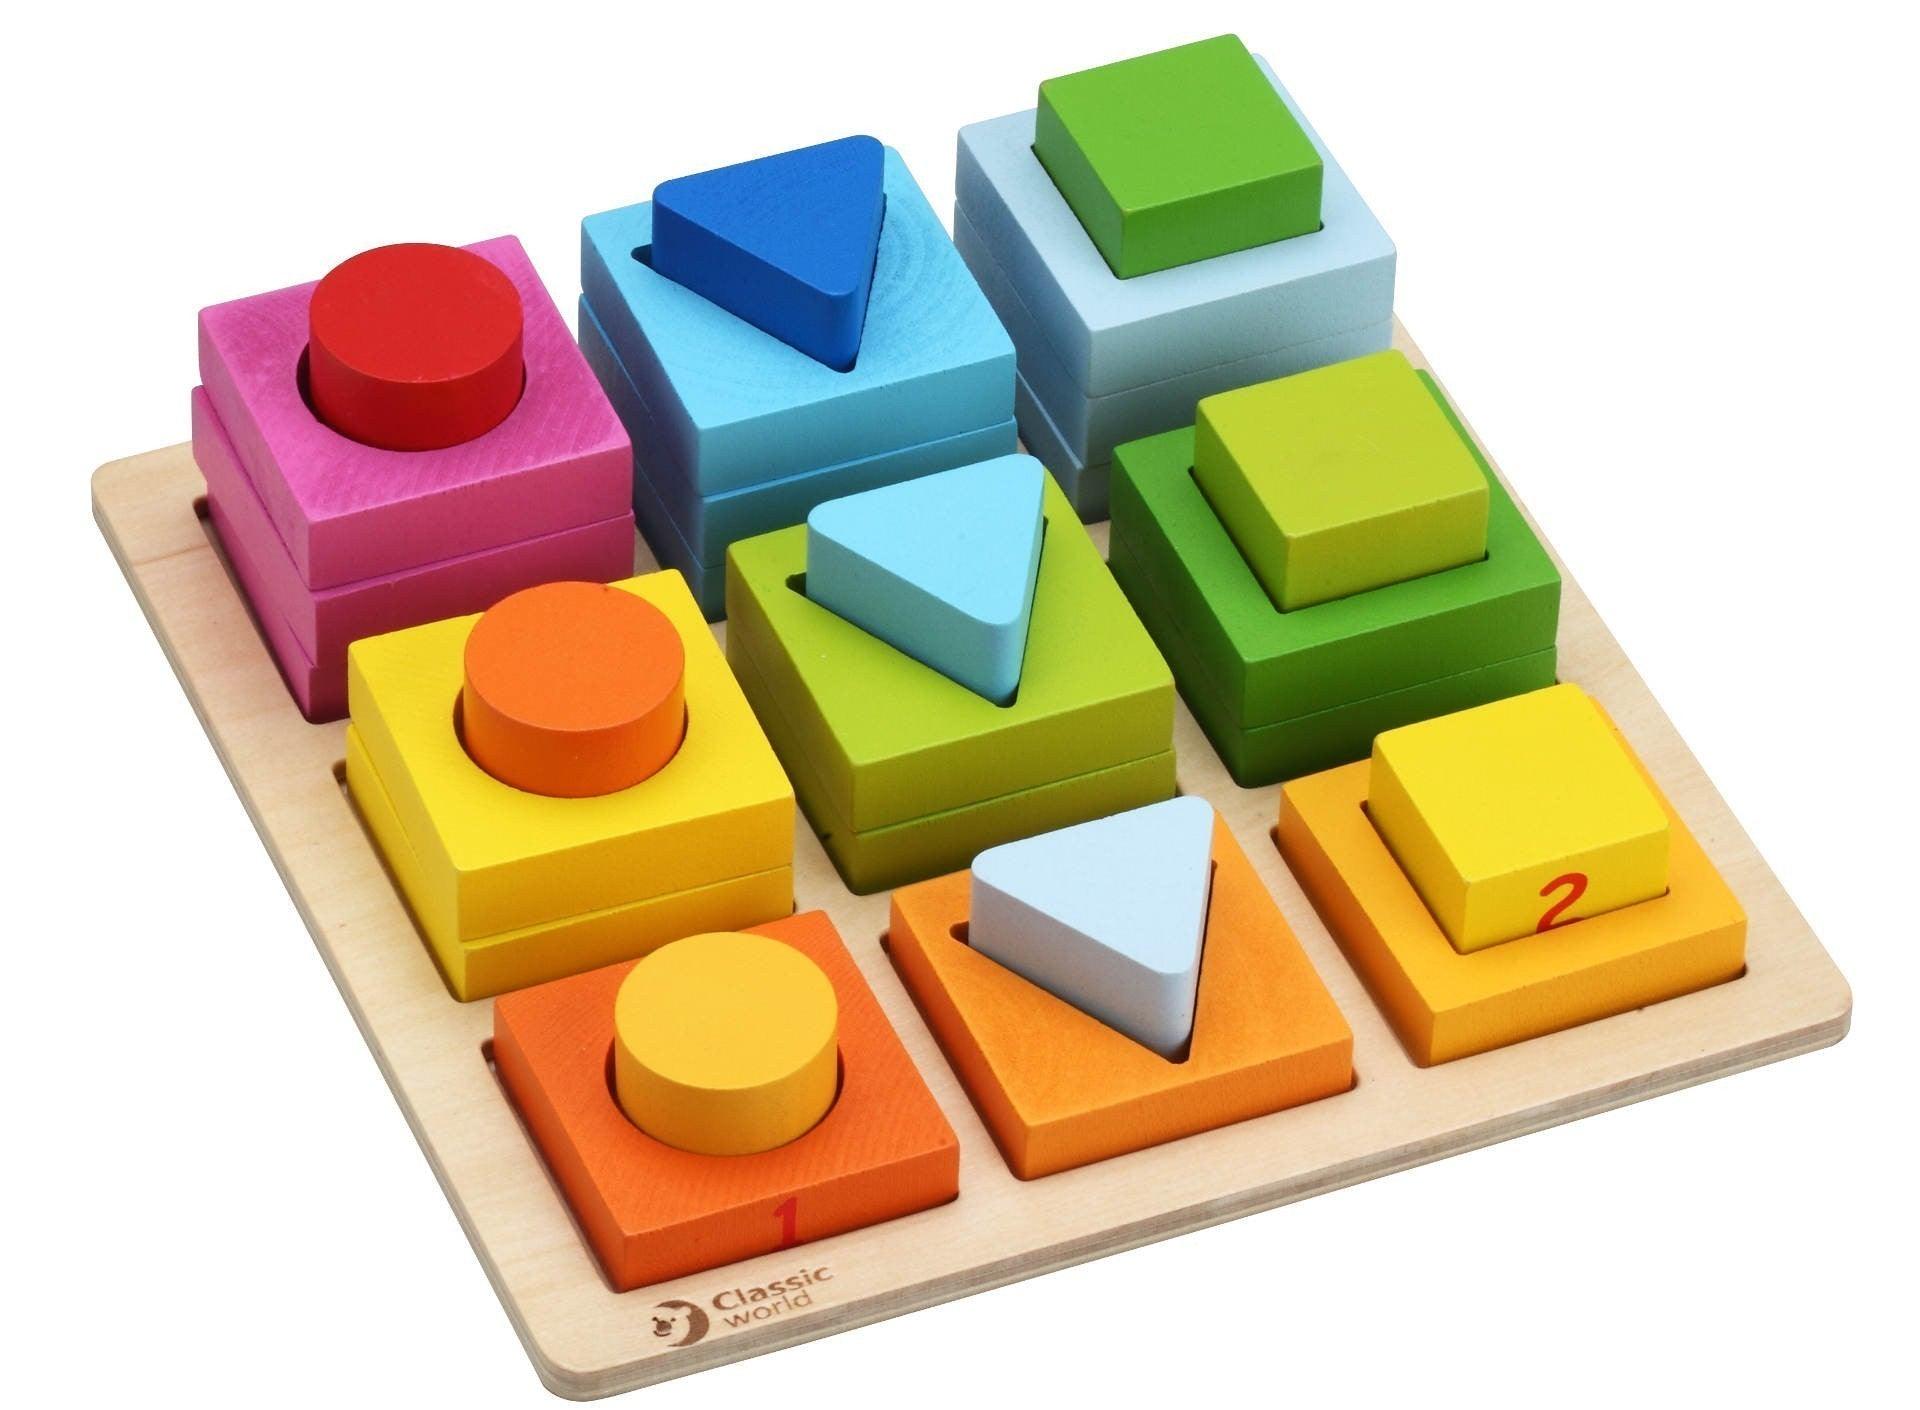 Wooden blocks with different geometric shapes - MoonyBoon